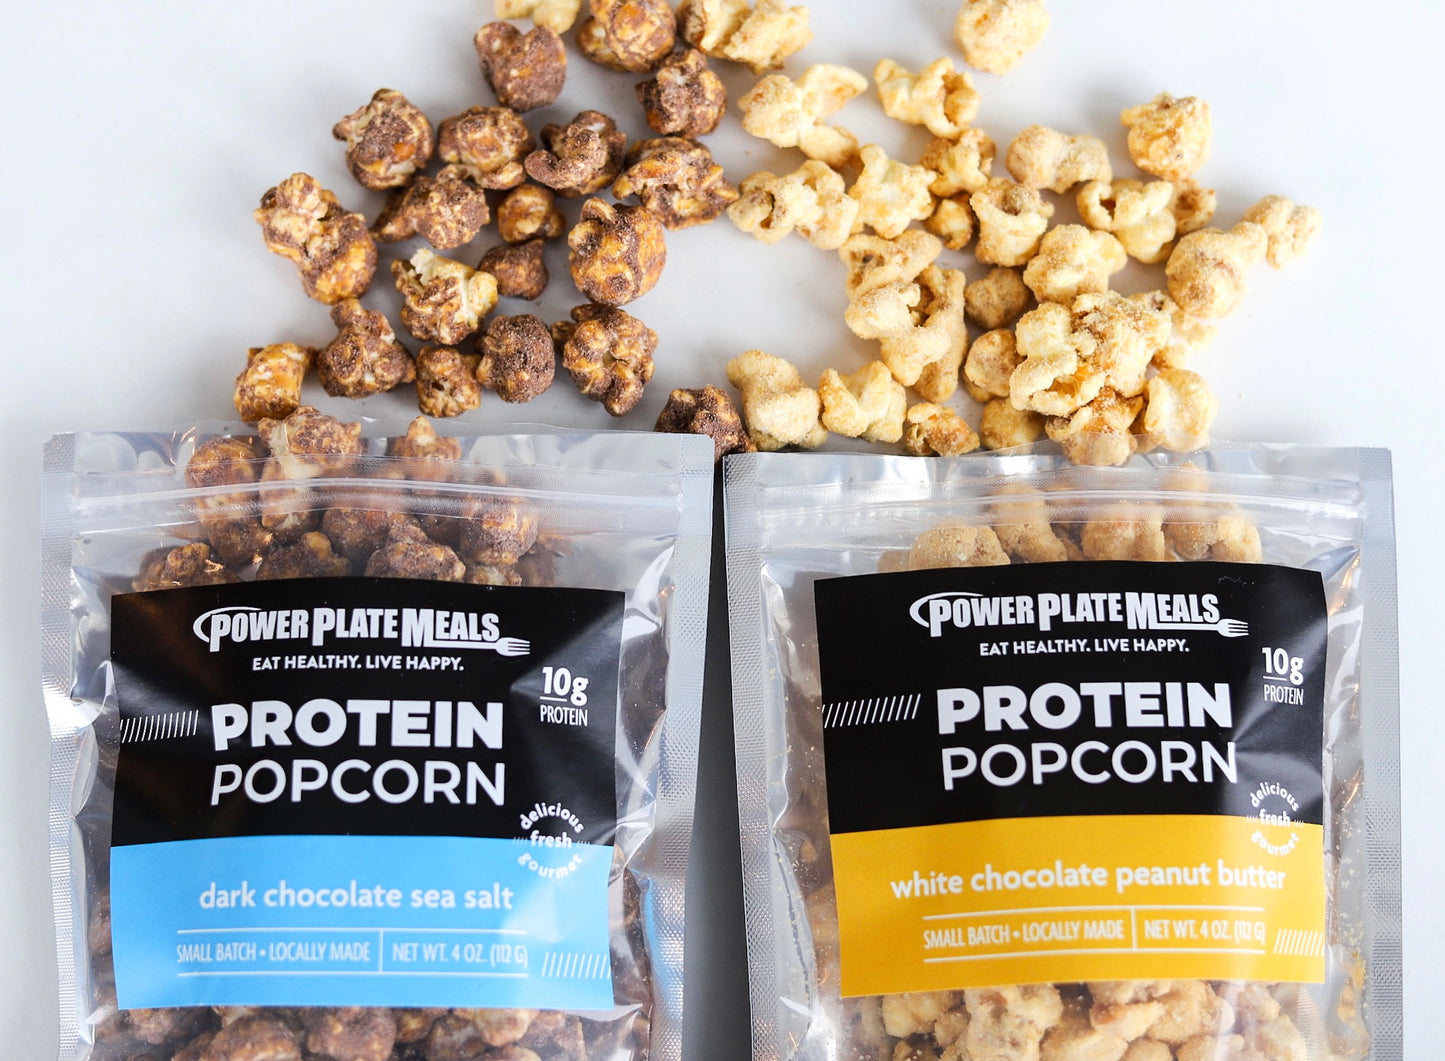 Introducing Protein Popcorn